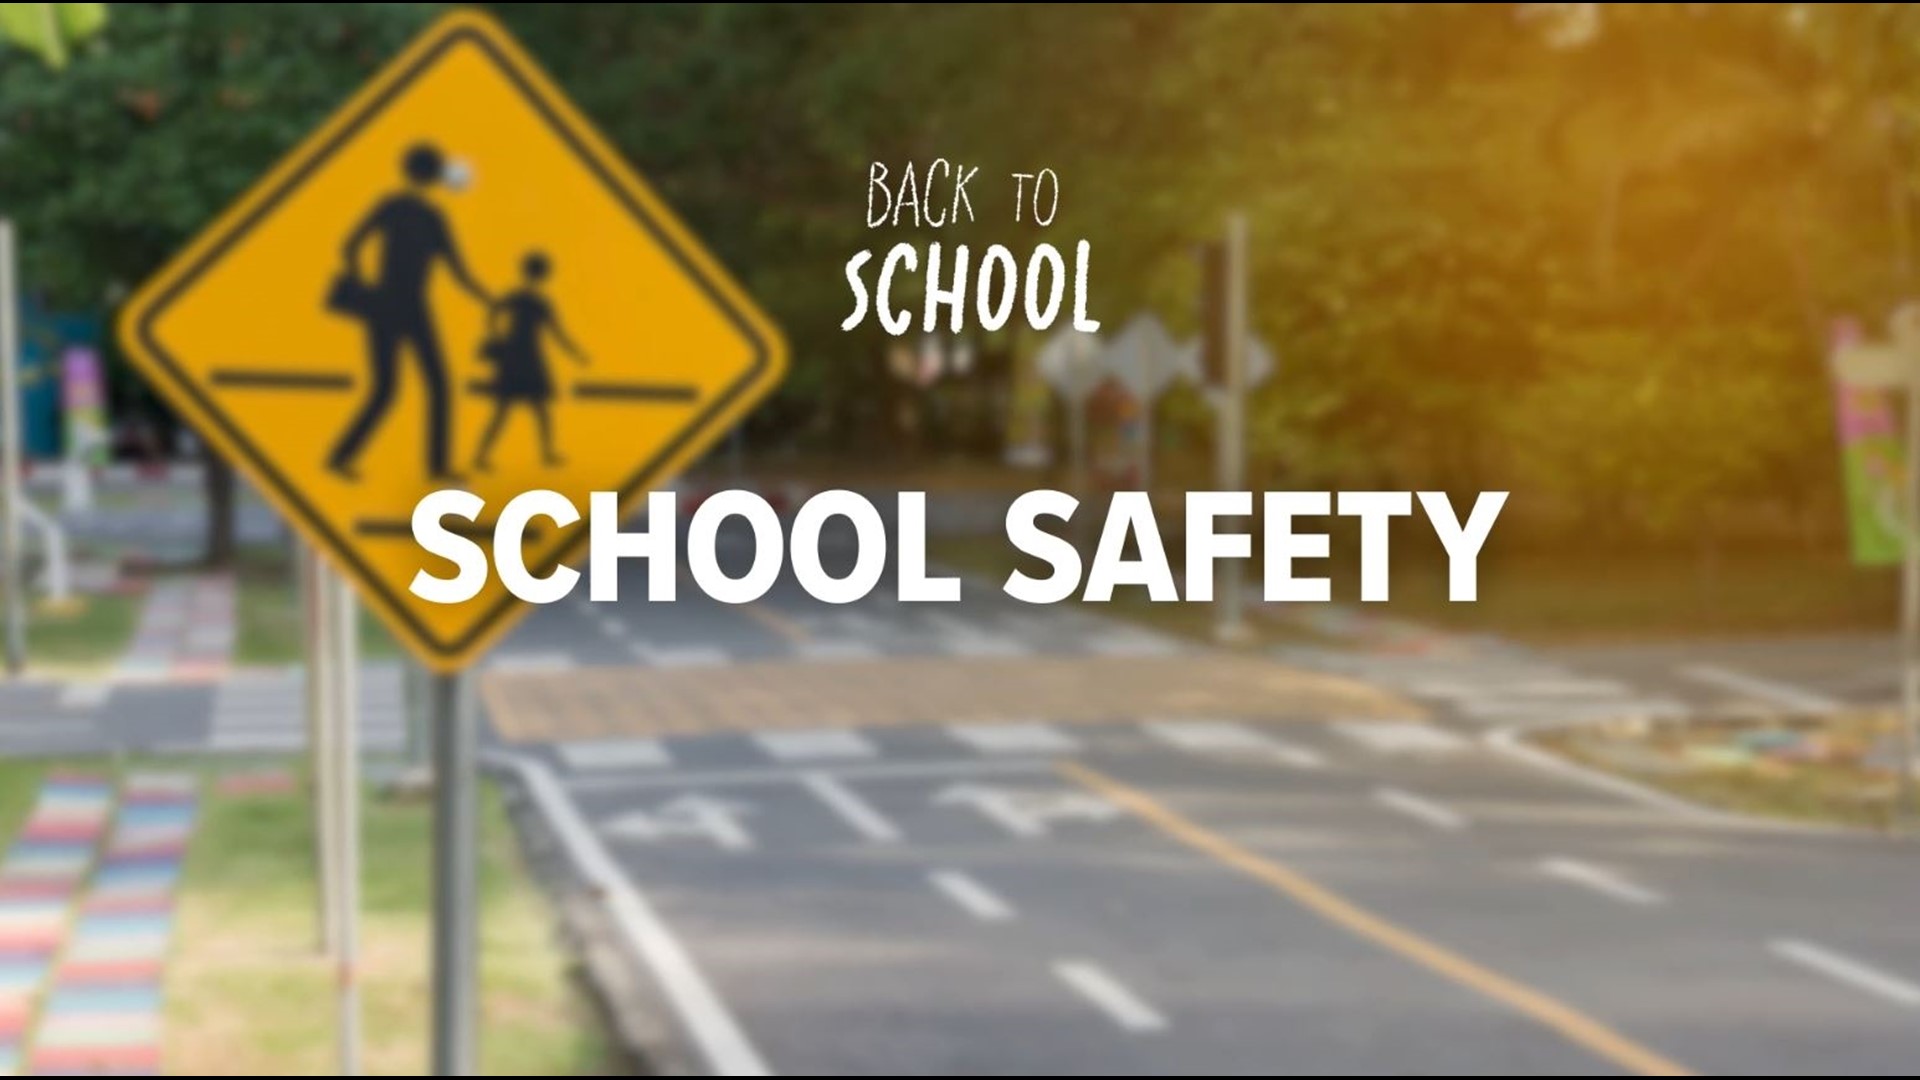 School safety is top of mind for parents, educators and students. A look at how some states and districts are addressing concerns, and important reminders for all.